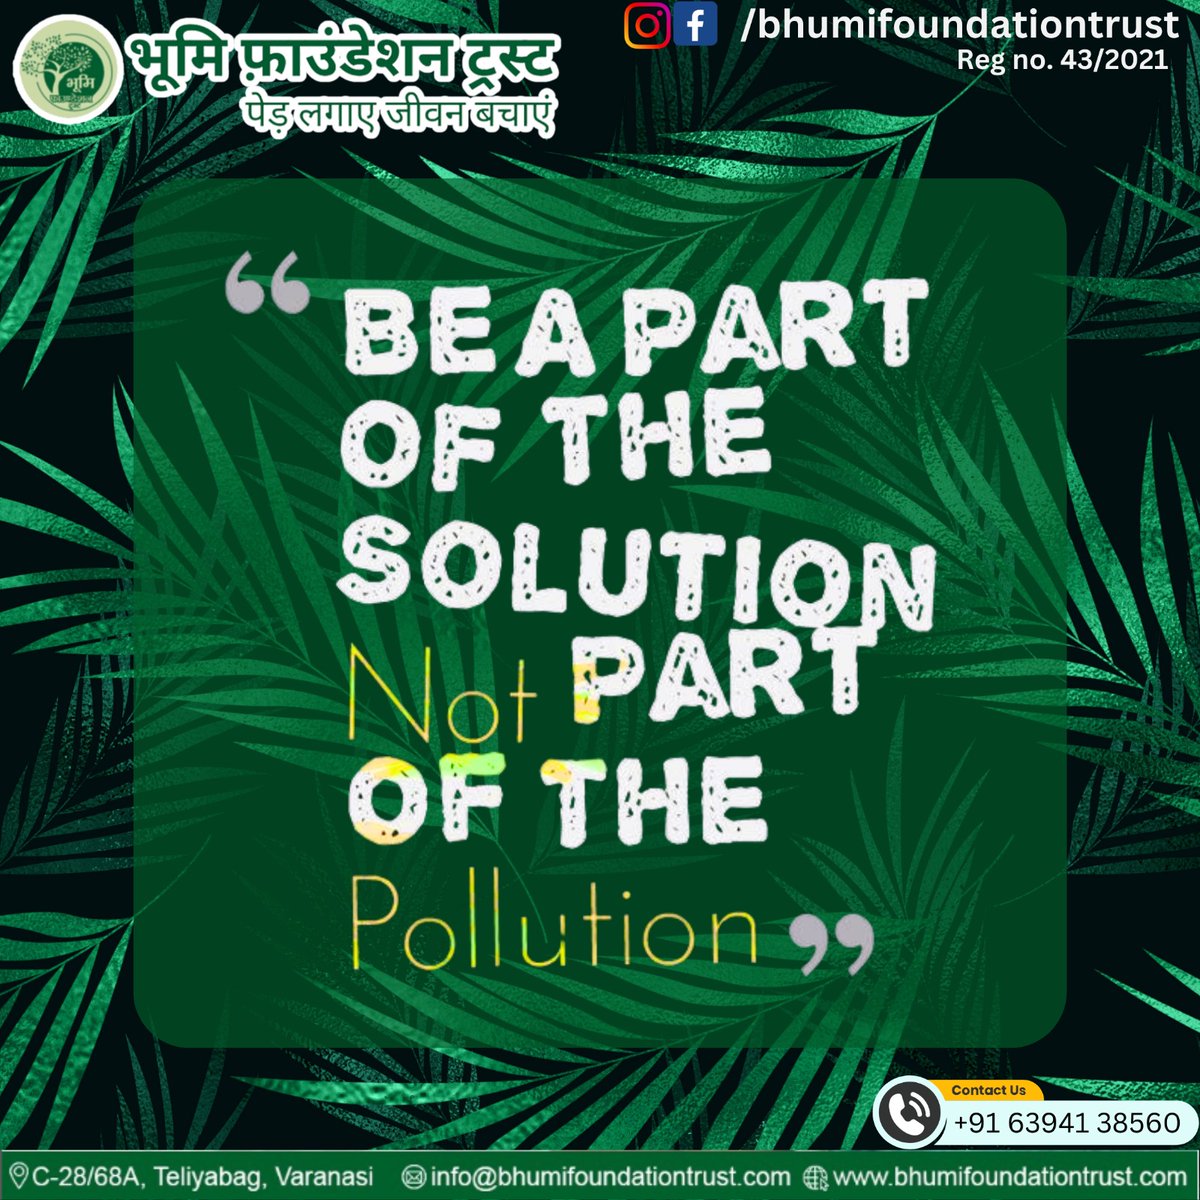 Be a part of the solution not part of the pollution!

जुड़िए भूमि फाऊंडेशन ट्रस्ट से :
bhumifoundationtrust.com

#saveenvironment #bhumifoundation #airpollution #savetree #savefuture #save #pollutionfreeindia